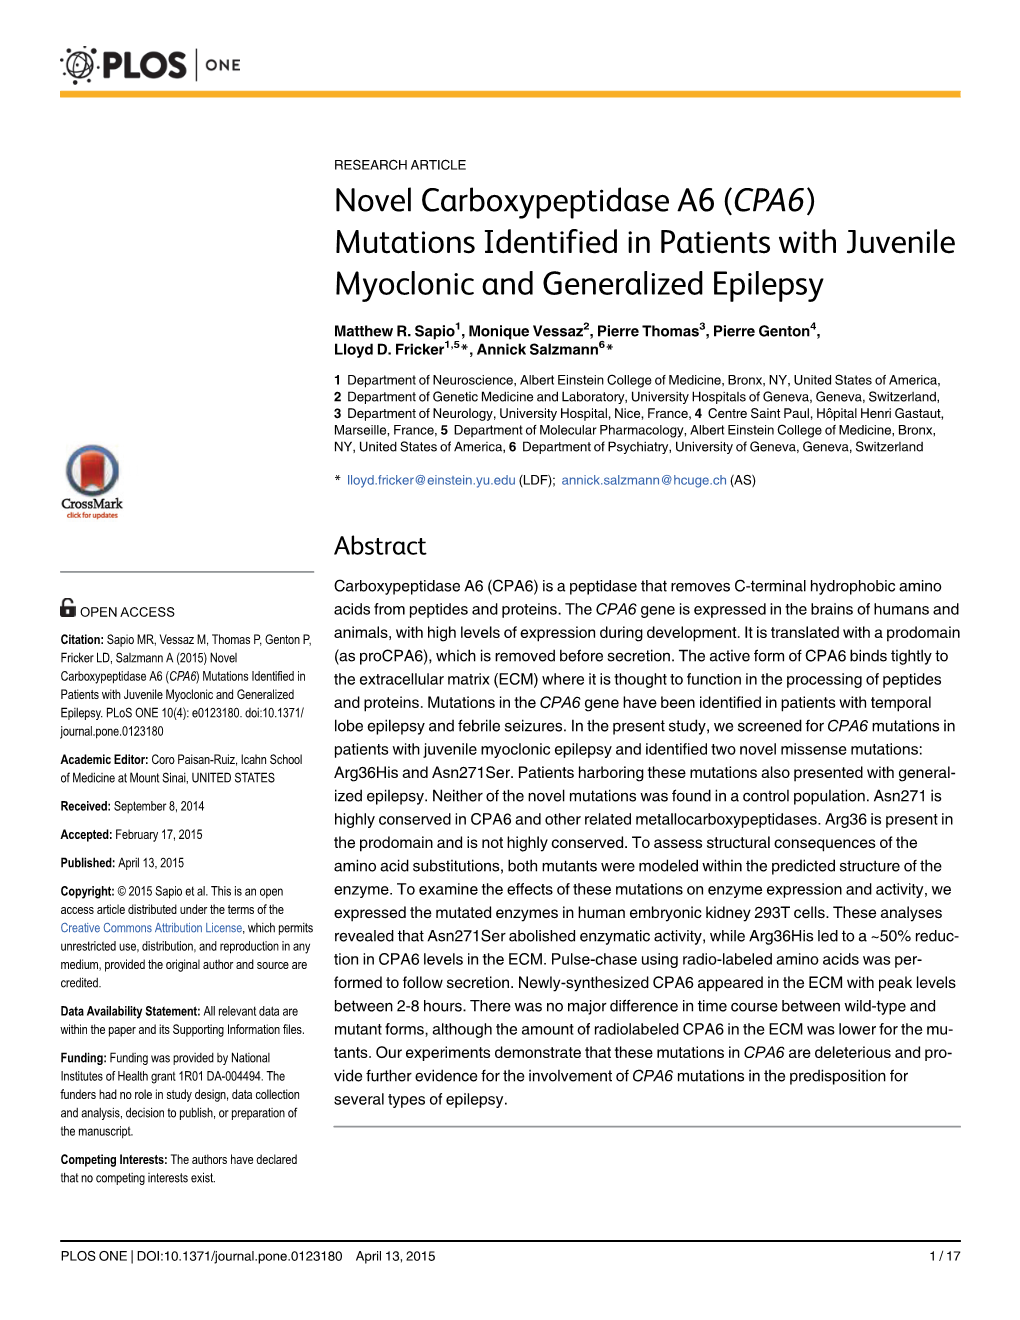 Novel Carboxypeptidase A6 (CPA6) Mutations Identified in Patients with Juvenile Myoclonic and Generalized Epilepsy